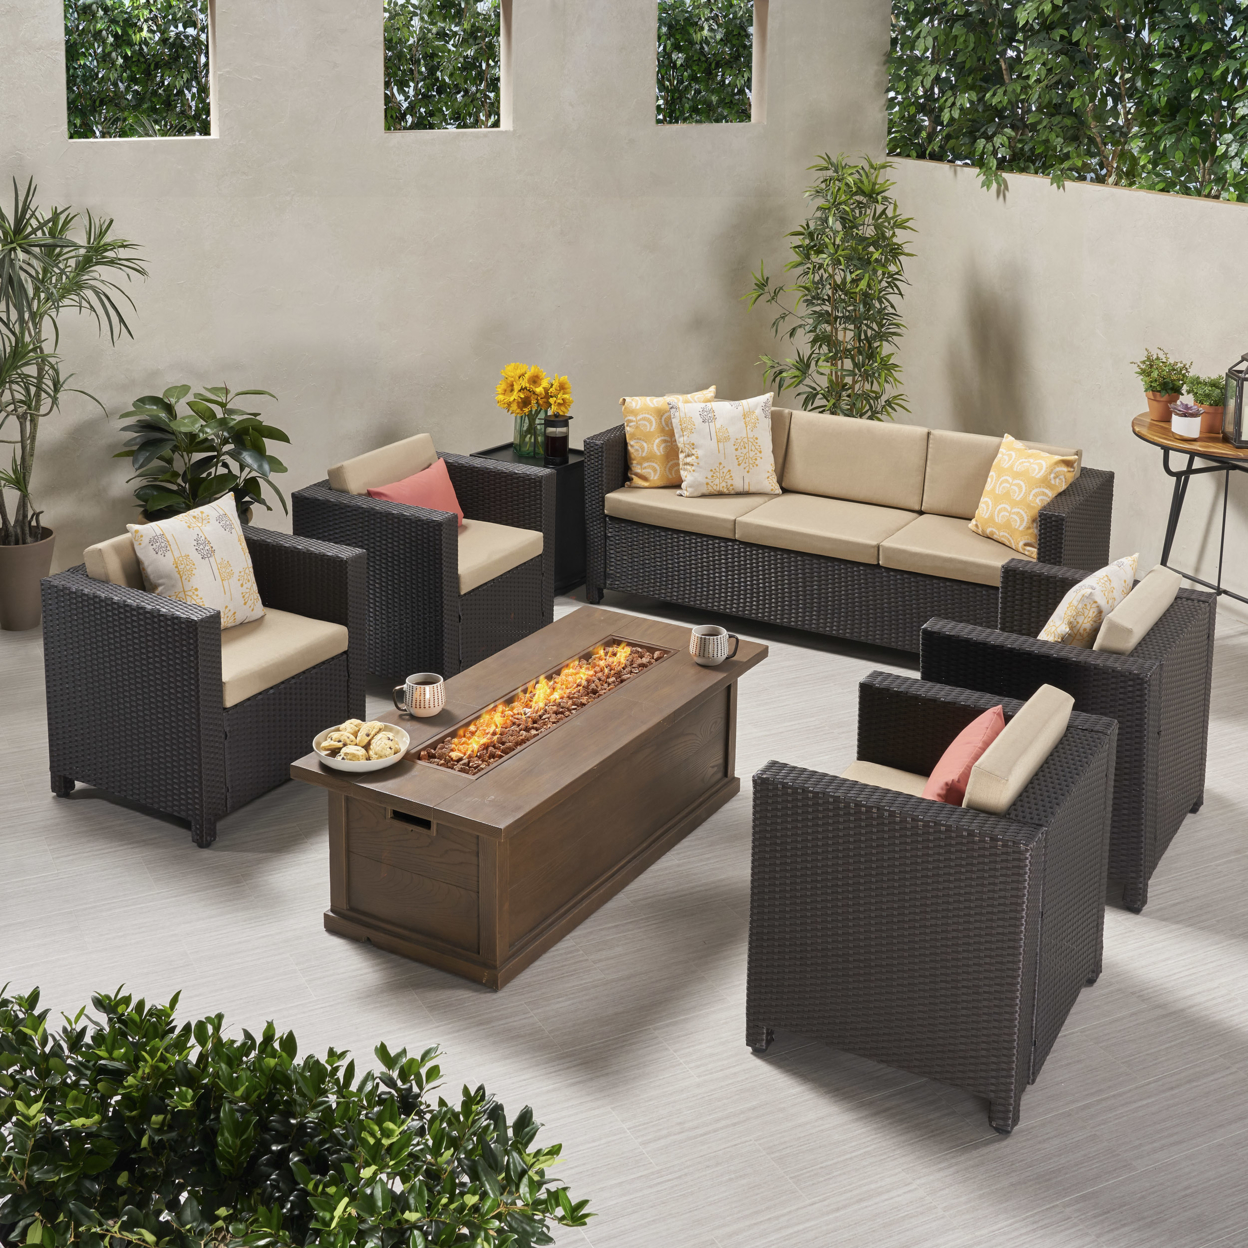 Simona Outdoor 7 Seater Wicker Chat Set With Fire Pit - Dark Brown + Beige + Brown